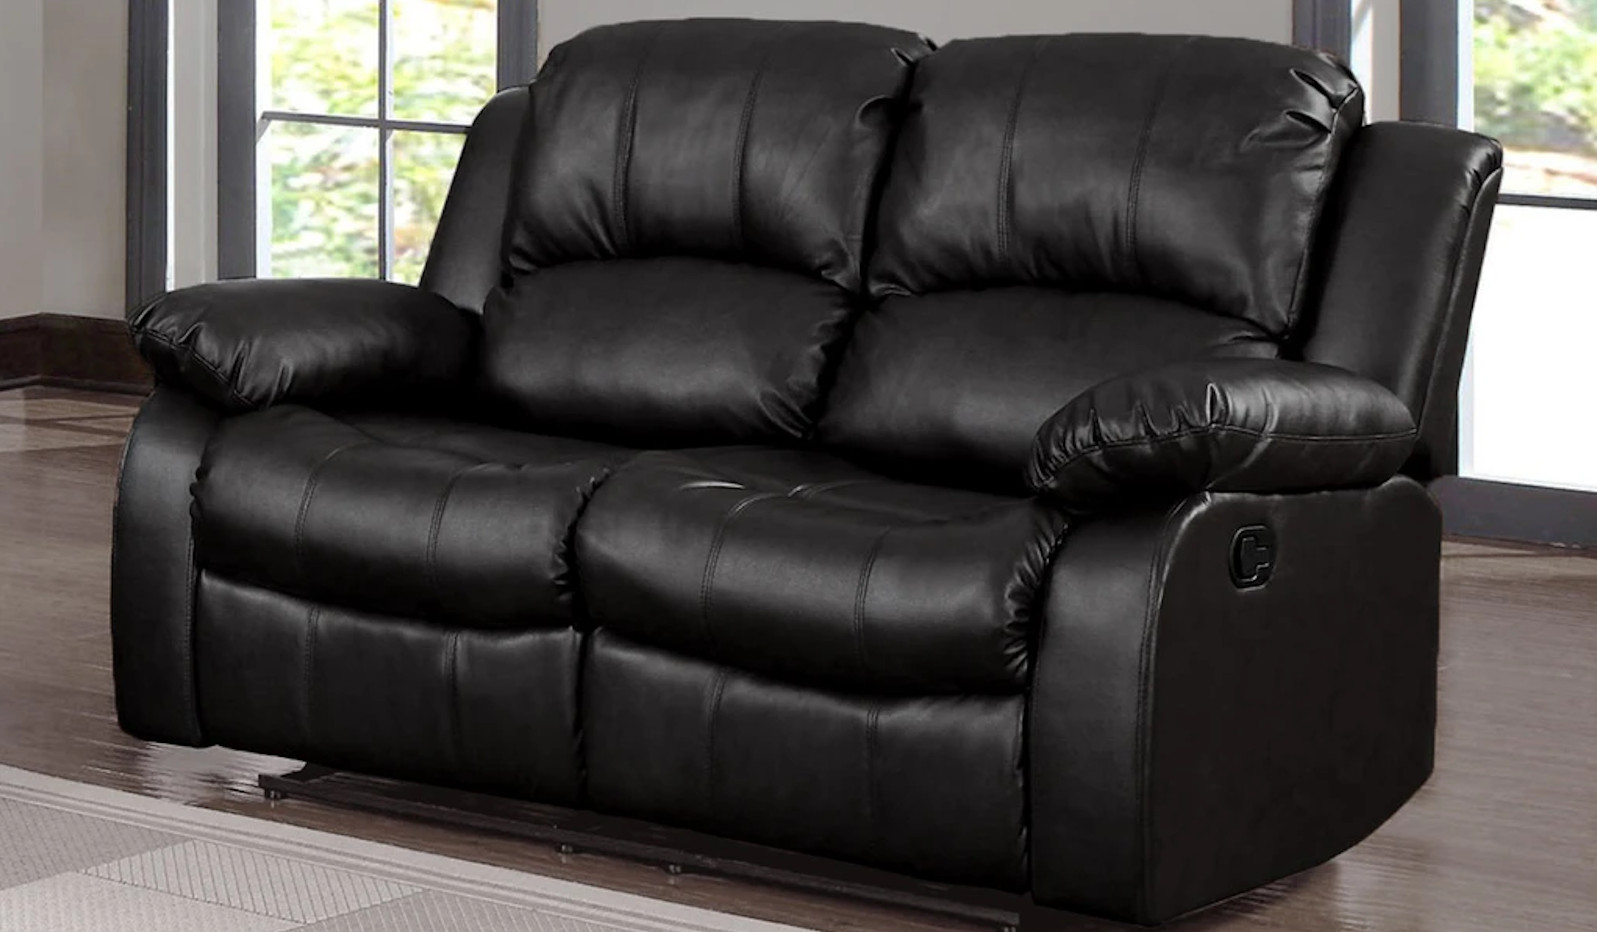 Clearance recliners